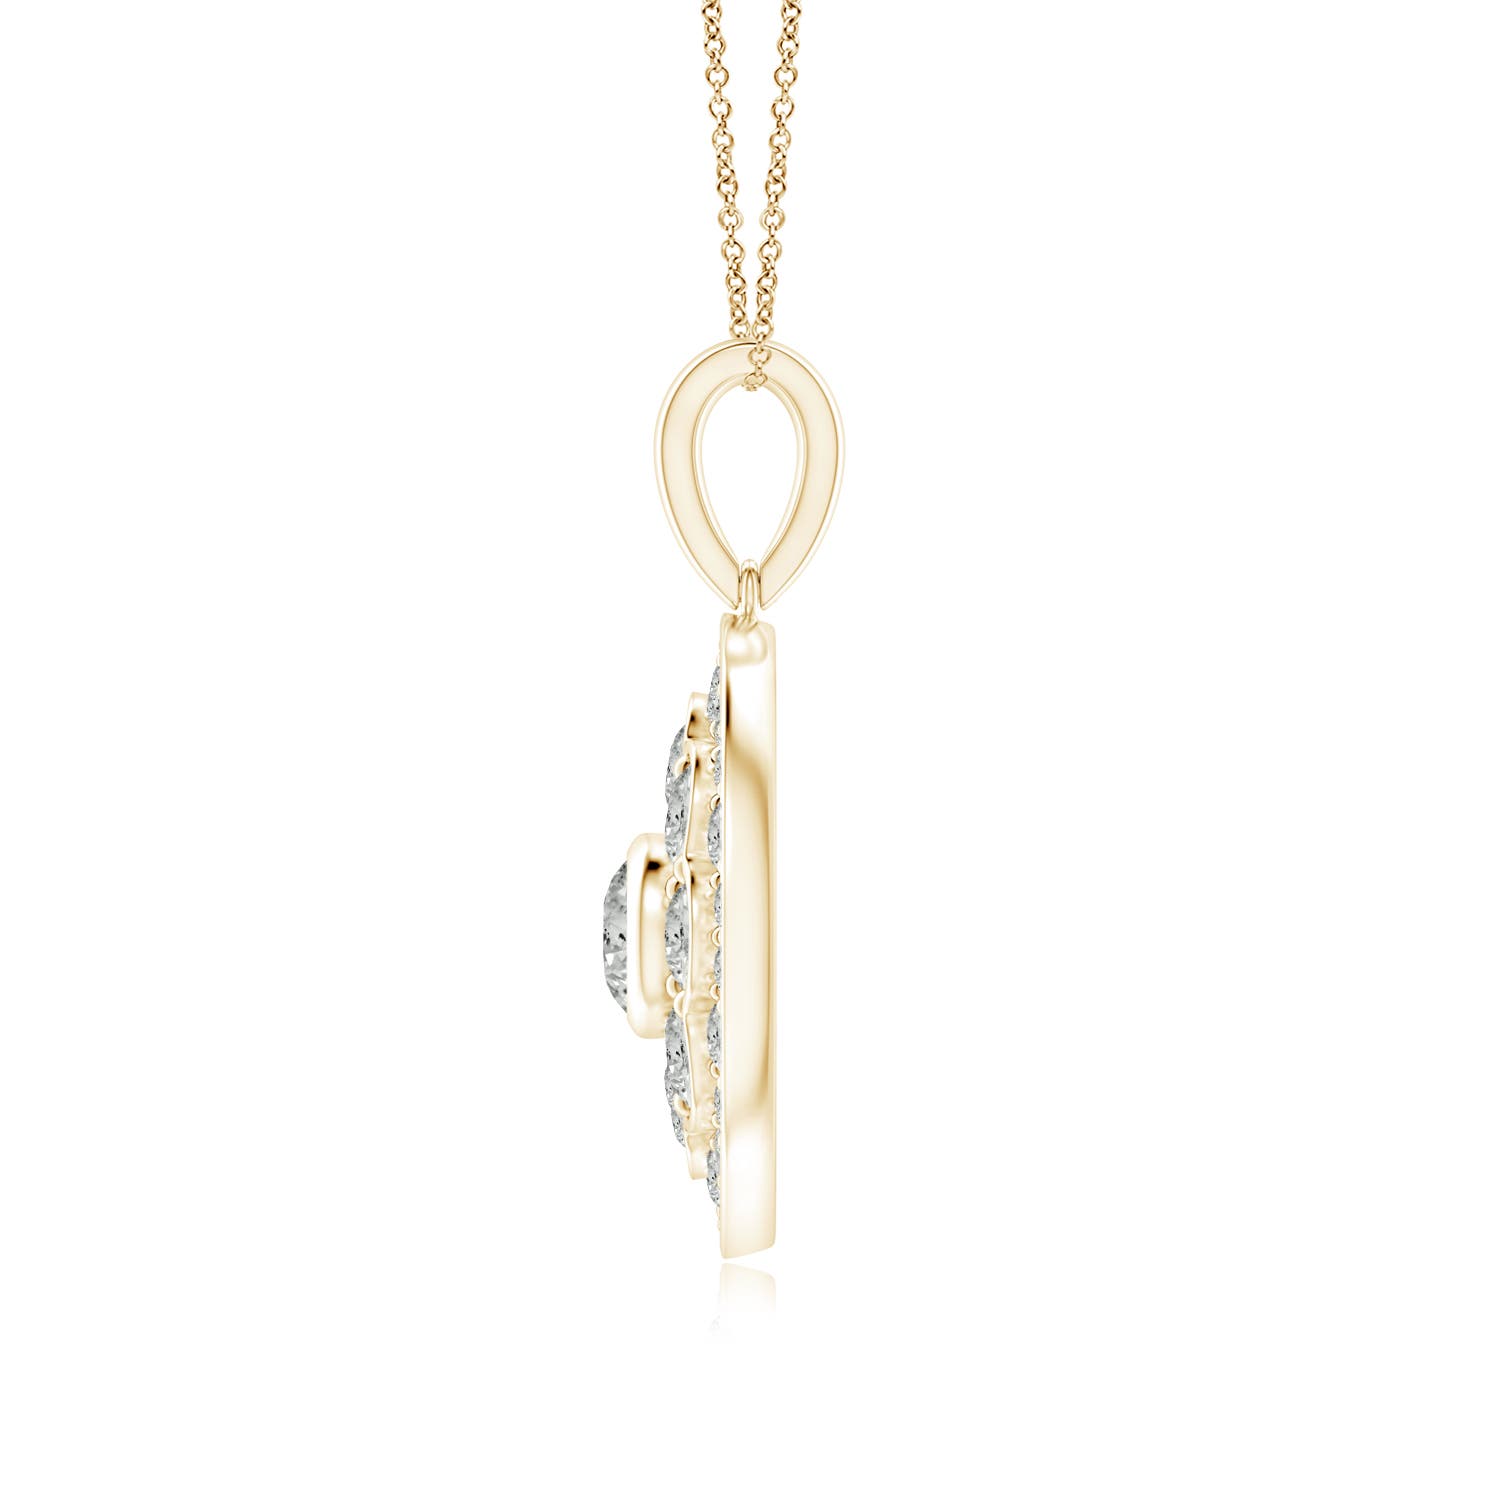 K, I3 / 0.82 CT / 14 KT Yellow Gold